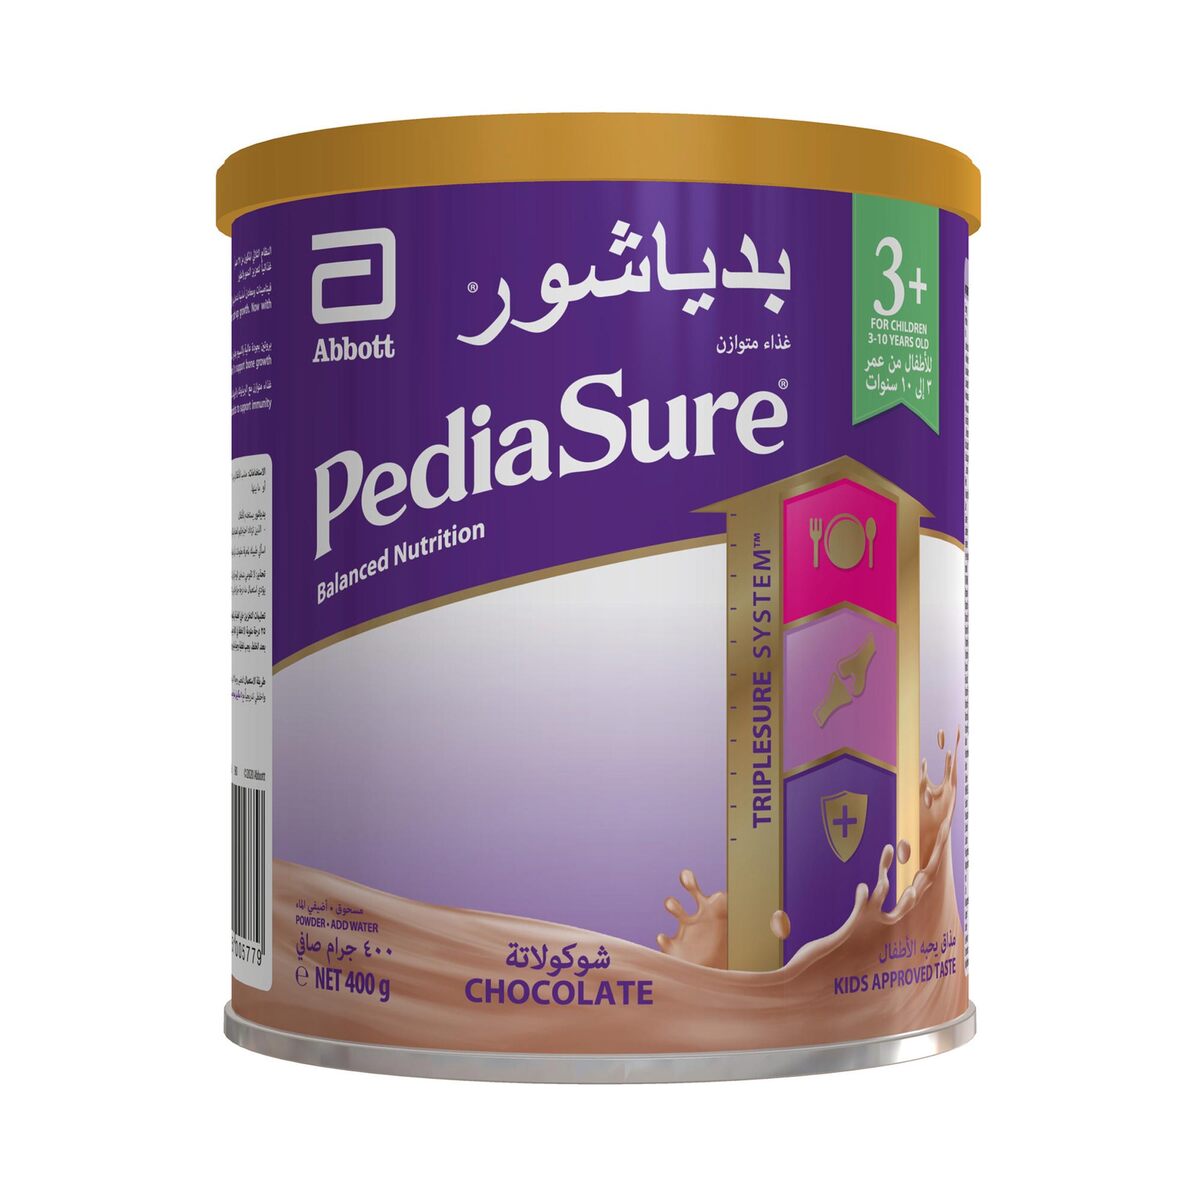 Pediasure Complete Balanced Nutrition With Chocolate Flavour Stage 3+ For Children 3-10 Years 400 g